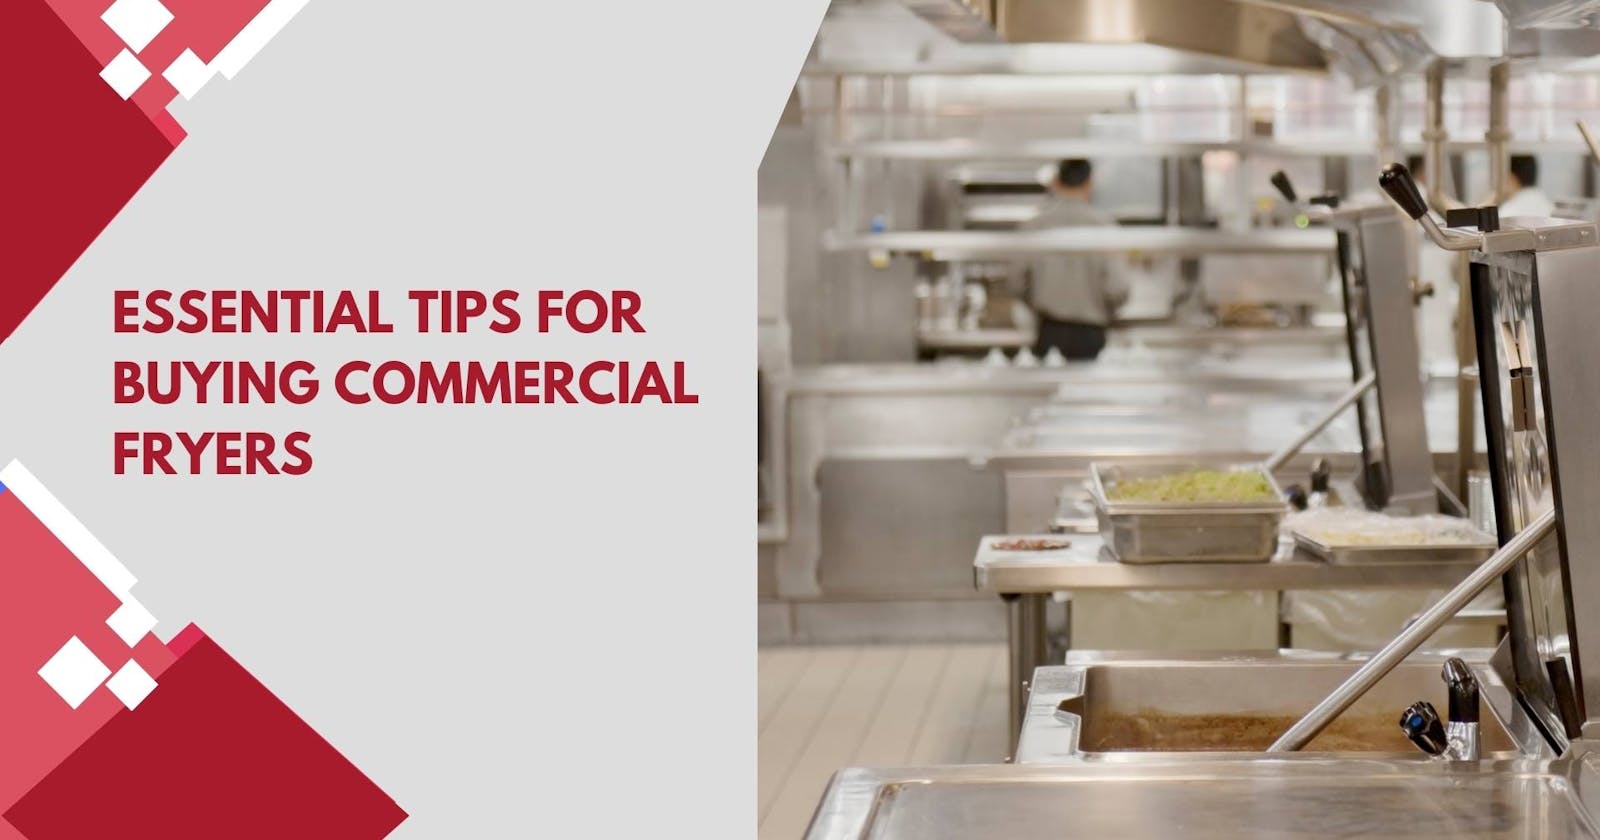 Essential Tips for Buying Commercial Fryers